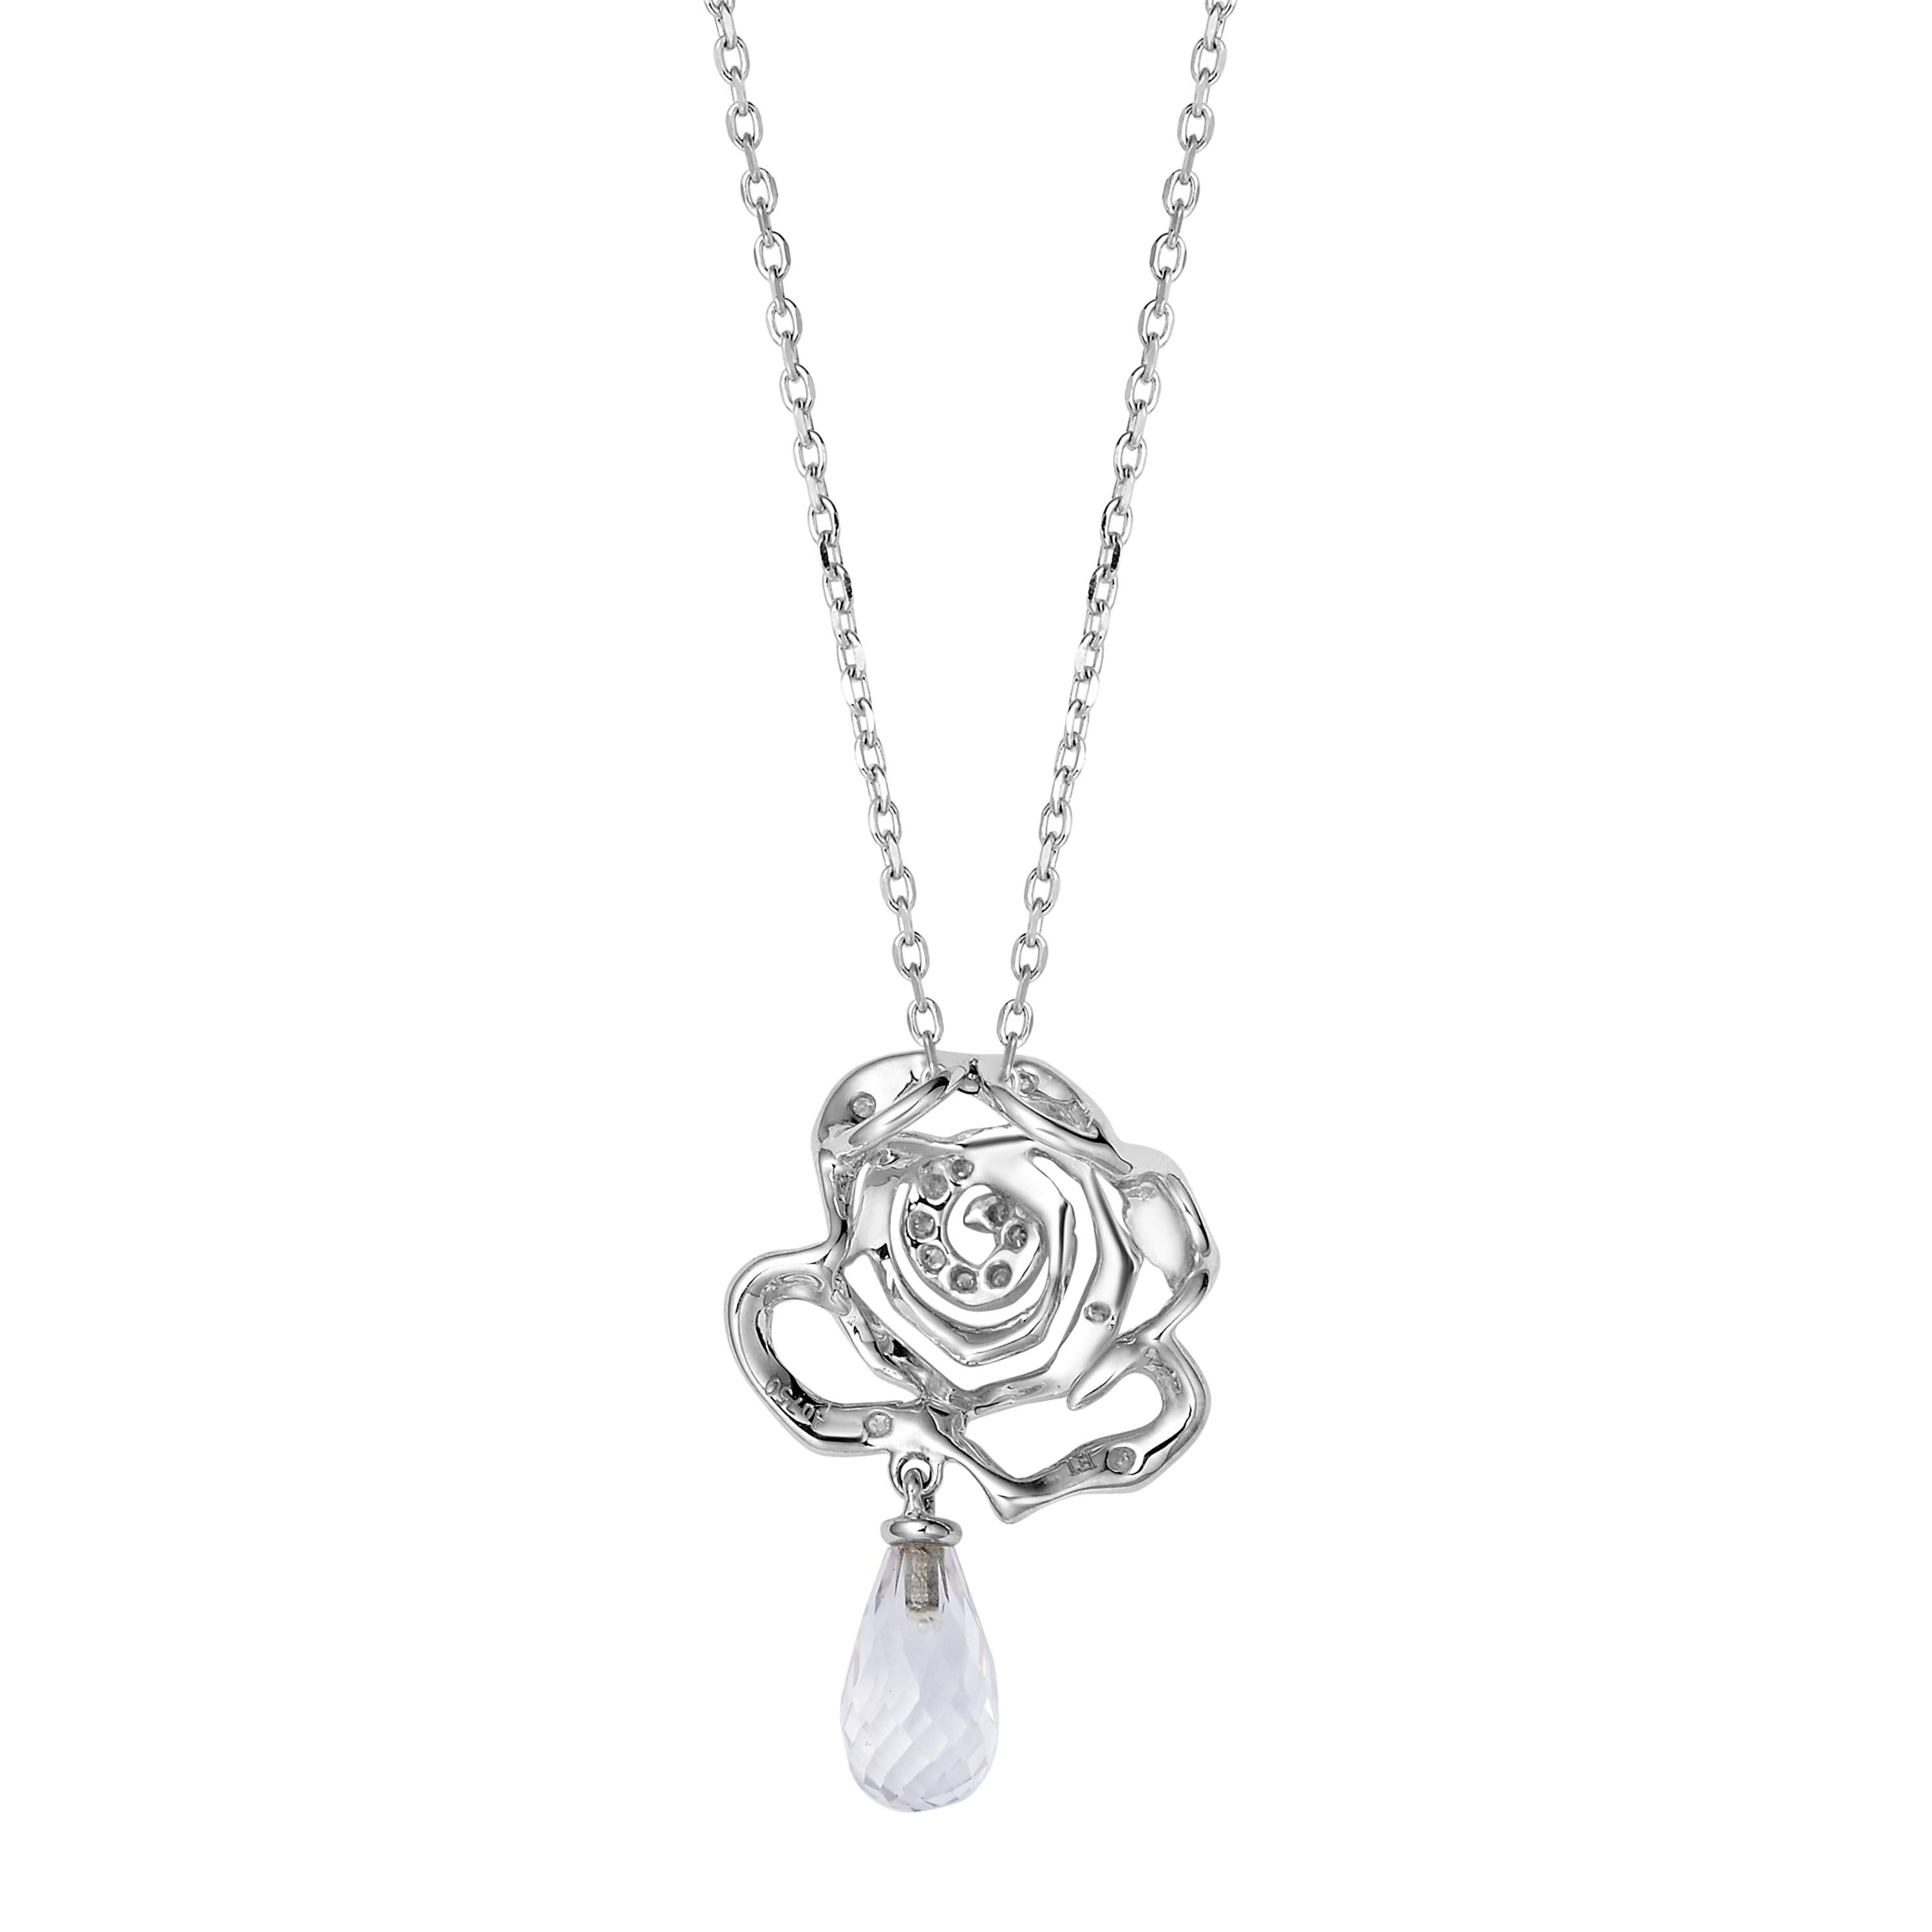 As enchanting as the real-life flower, the Rose collection offers a modern yet feminine look. This pendant features a delicate 18ct white gold rose set with 0.02ct diamonds and suspends an excellently translucent 0.8ct rose quartz briolette.

- Size